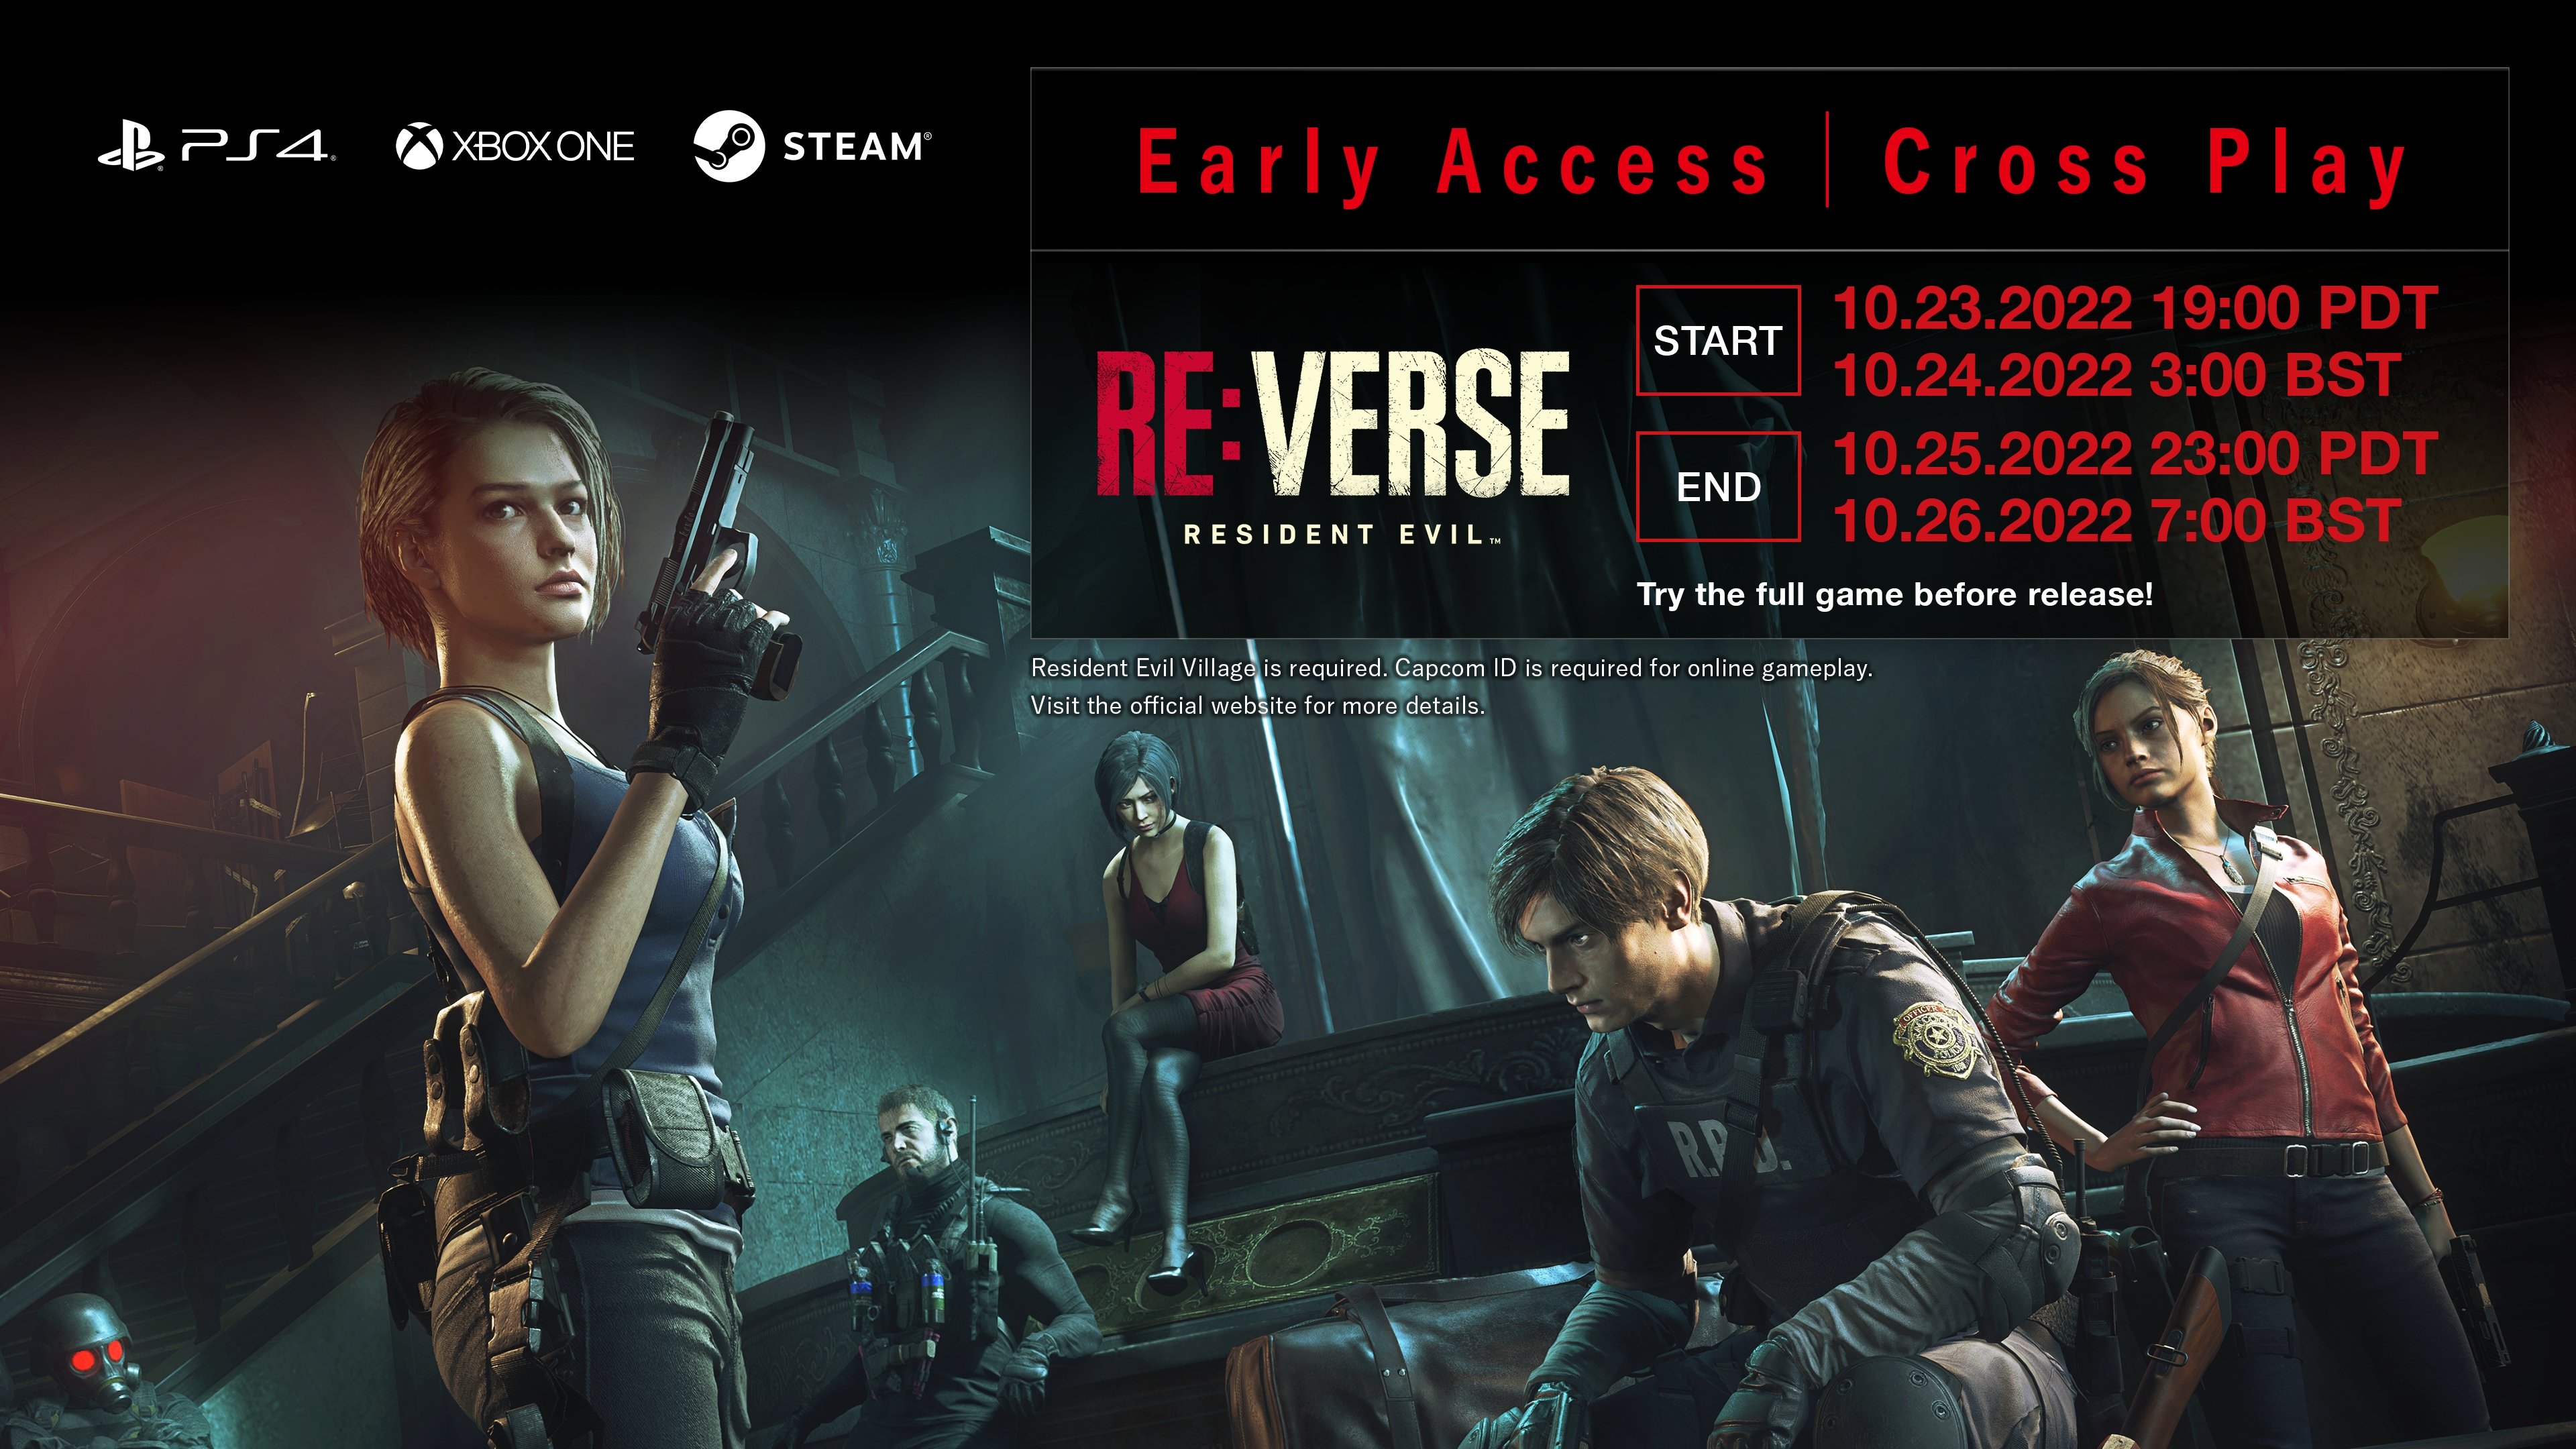 #
      Resident Evil Re:Verse cross-play early access period set for October 23 to 25